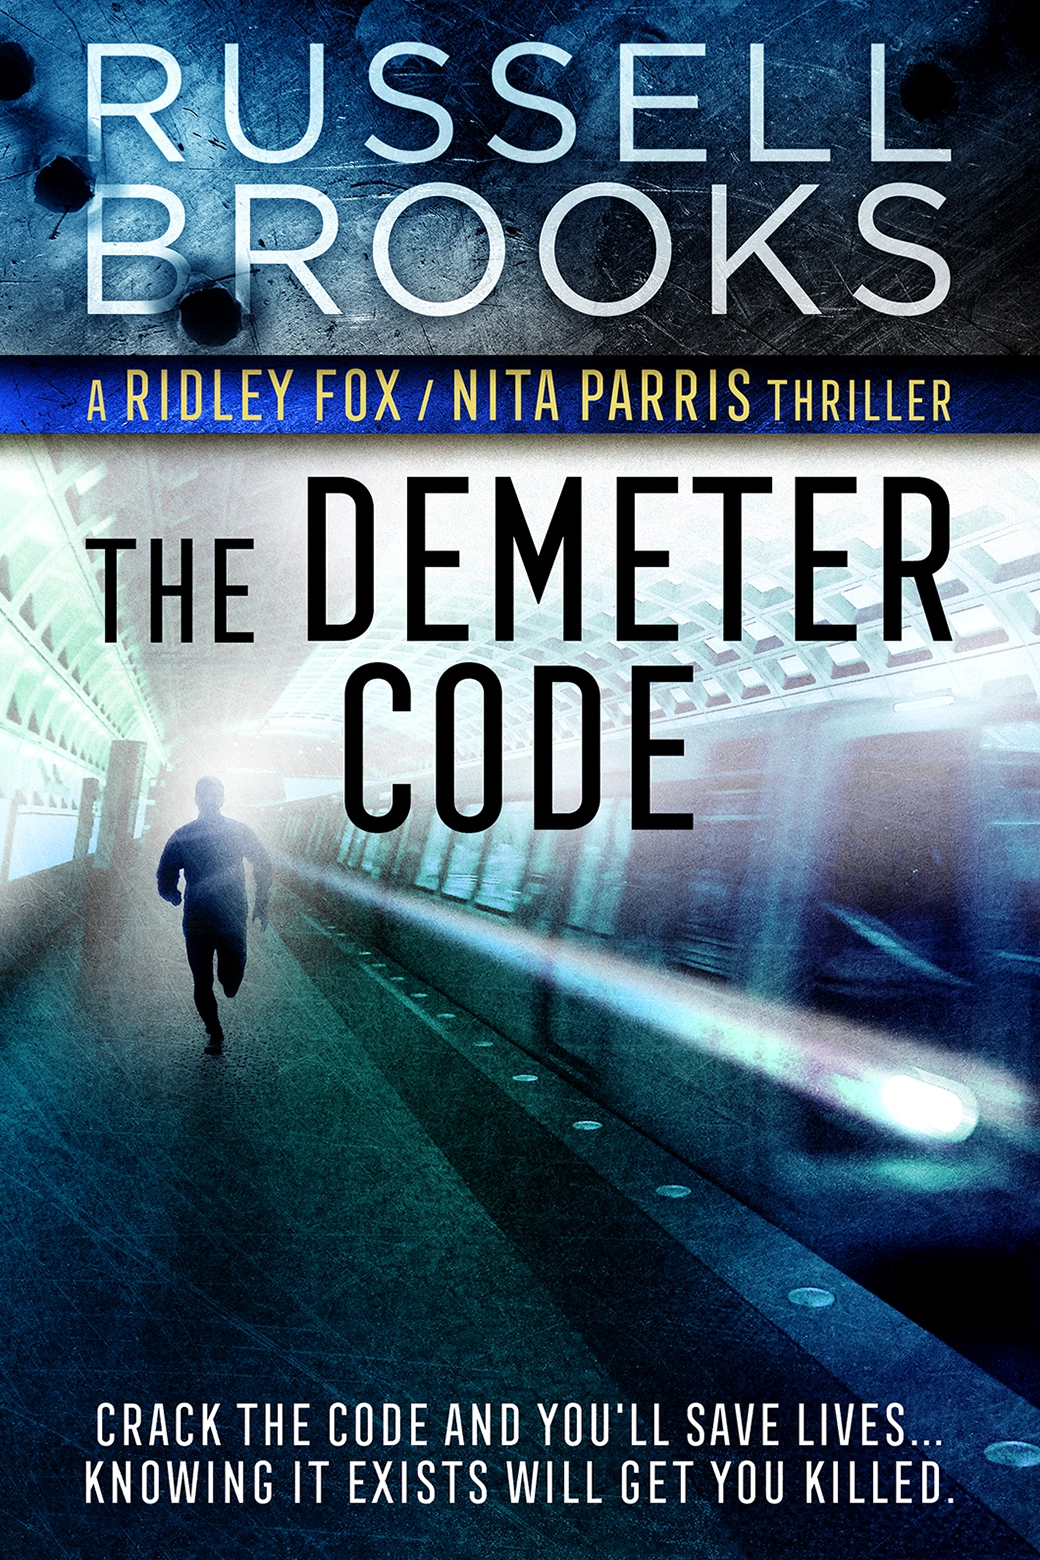 Buy The Demeter Code Now, The Demeter Code, books by Russell Brooks, biological thriller book, action adventure book, espionage book, books with Black protagonists, authors similar to Eric Jerome Dickie